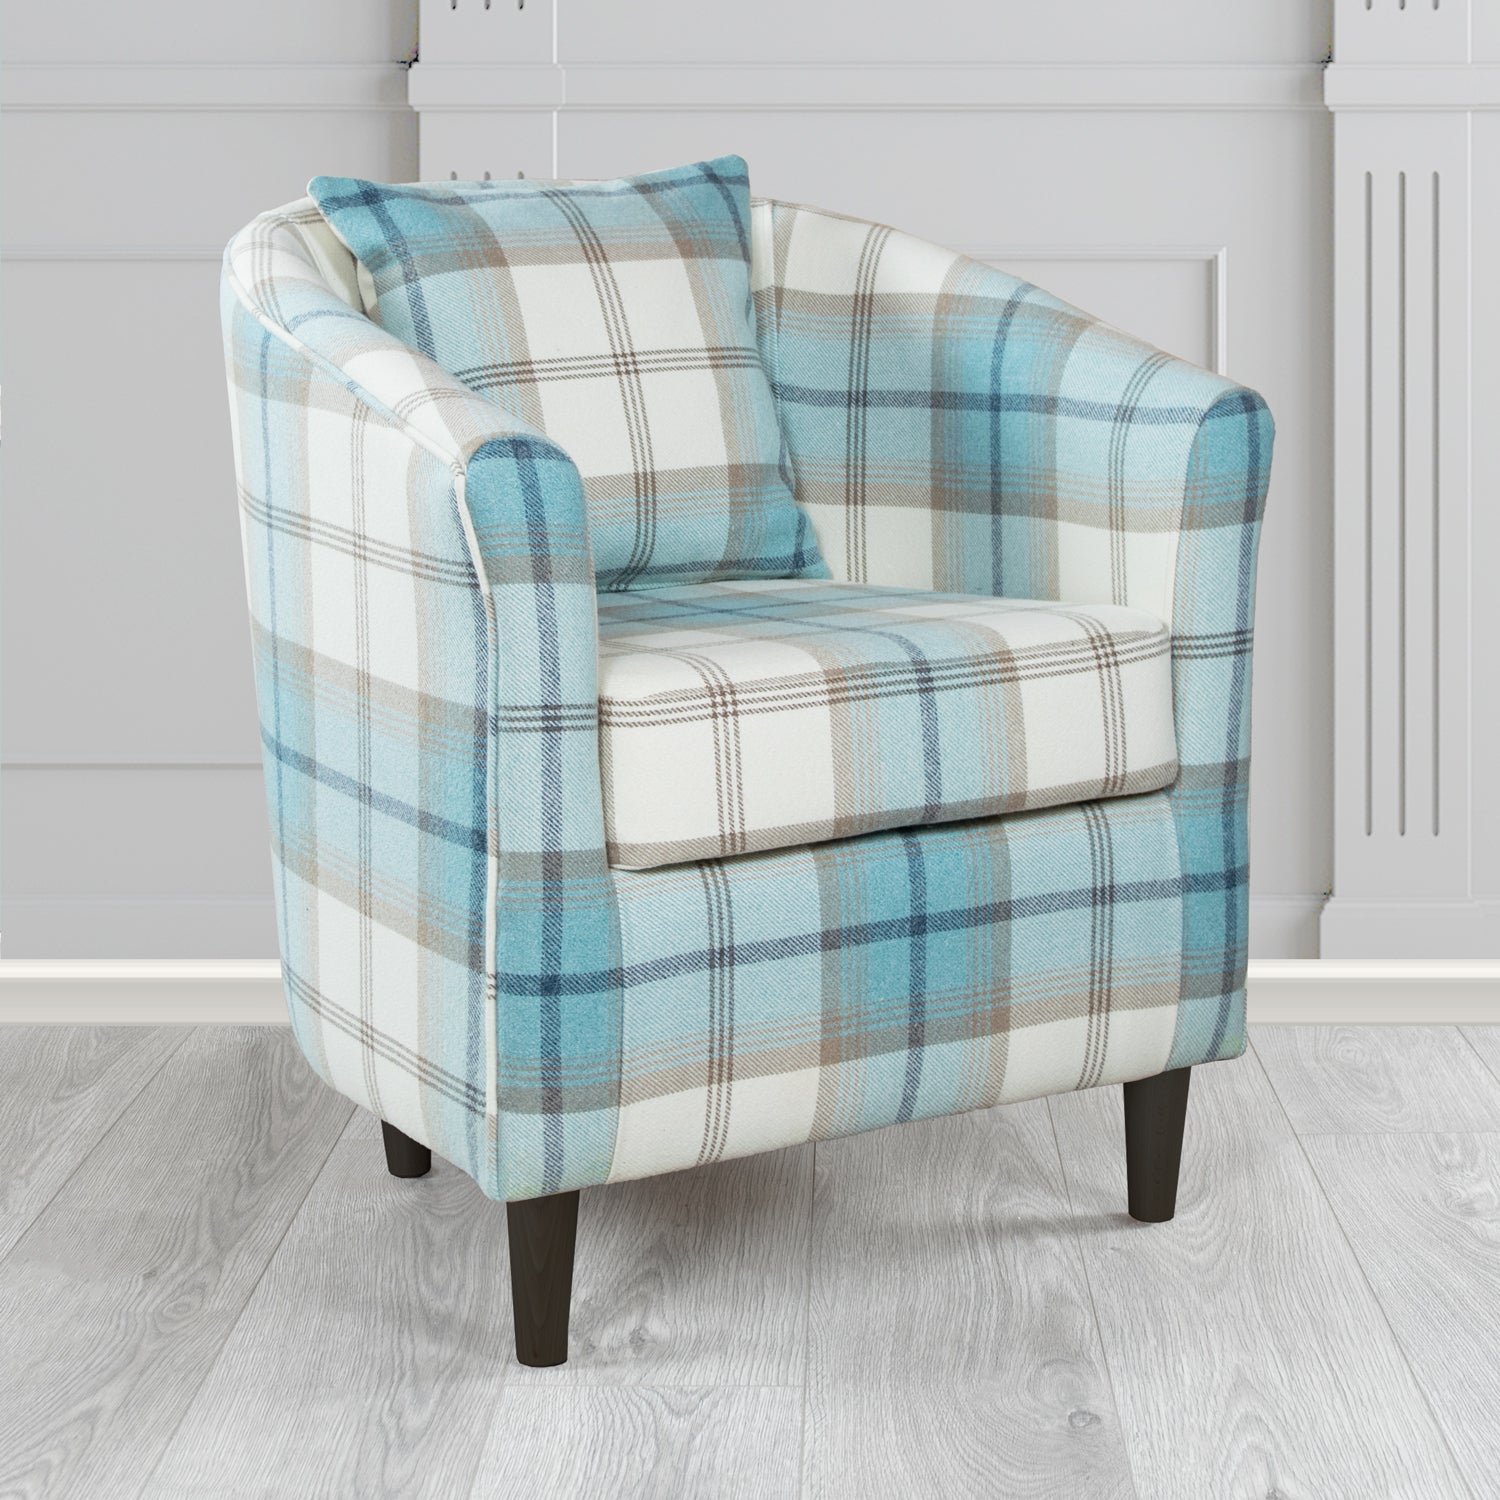 St Tropez Balmoral Sky Check Tartan Fabric Tub Chair with Scatter Cushion (6627063136298)